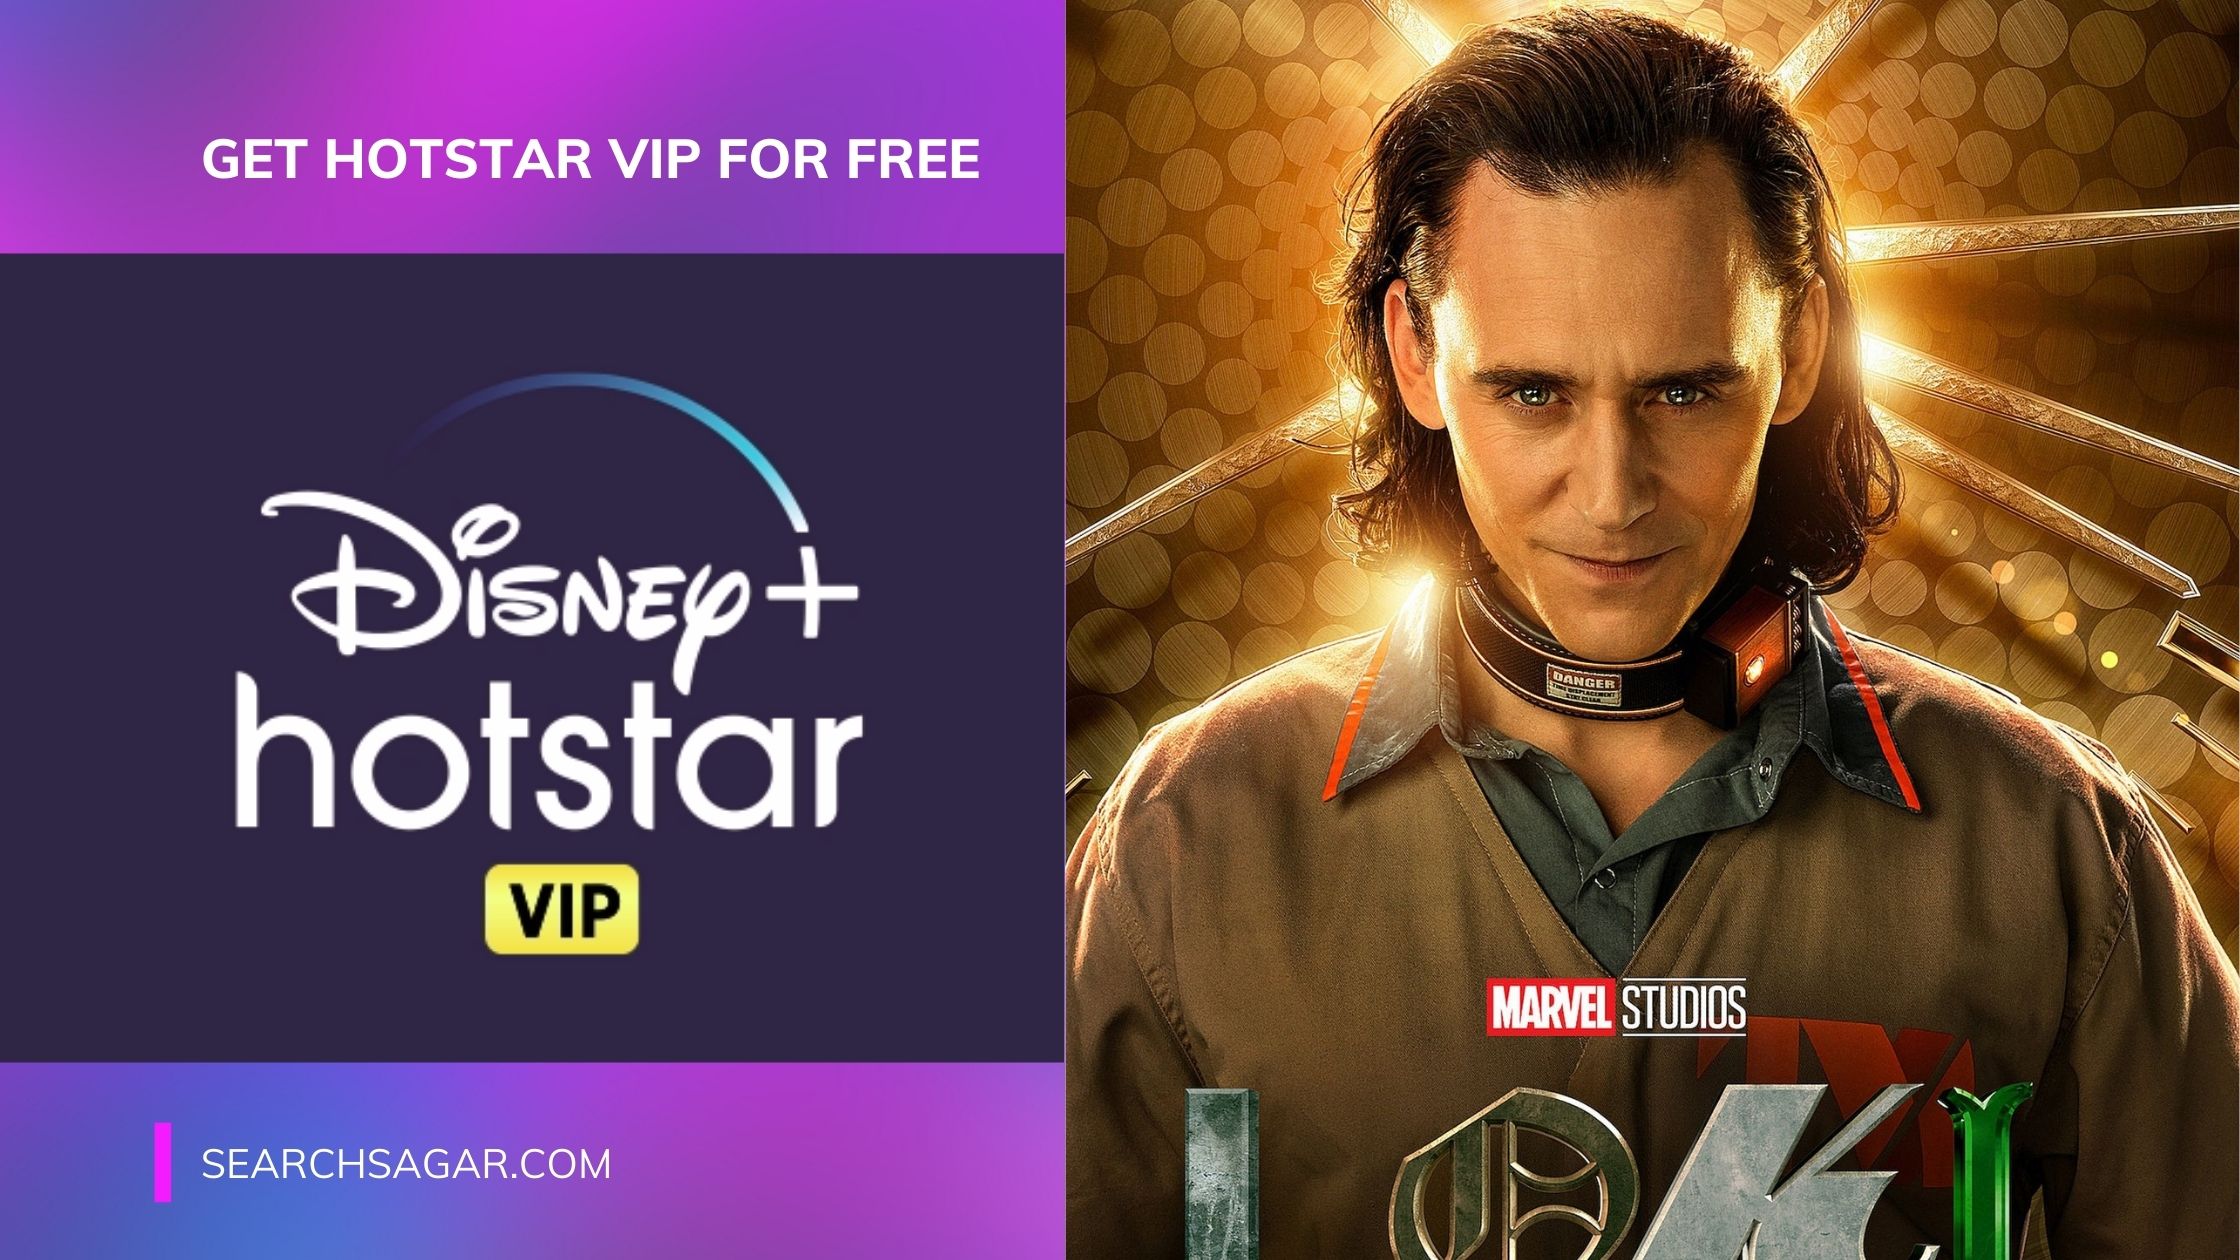 GET HOTSTAR VIP for Free